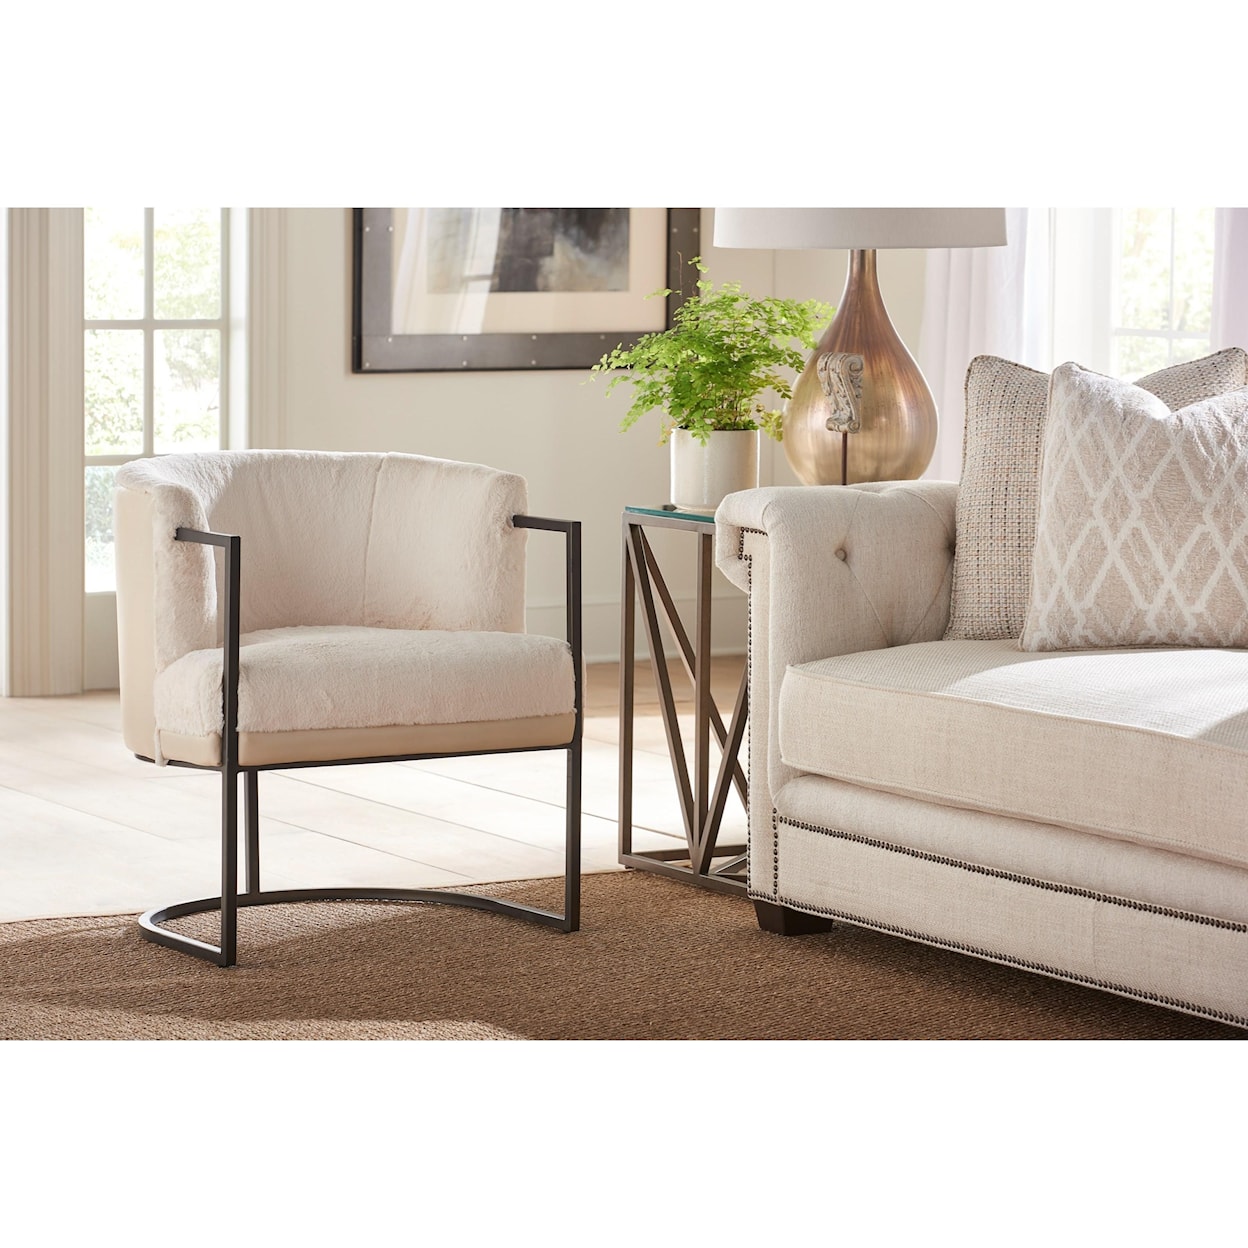 Universal Accents Alpine Valley Accent Chair